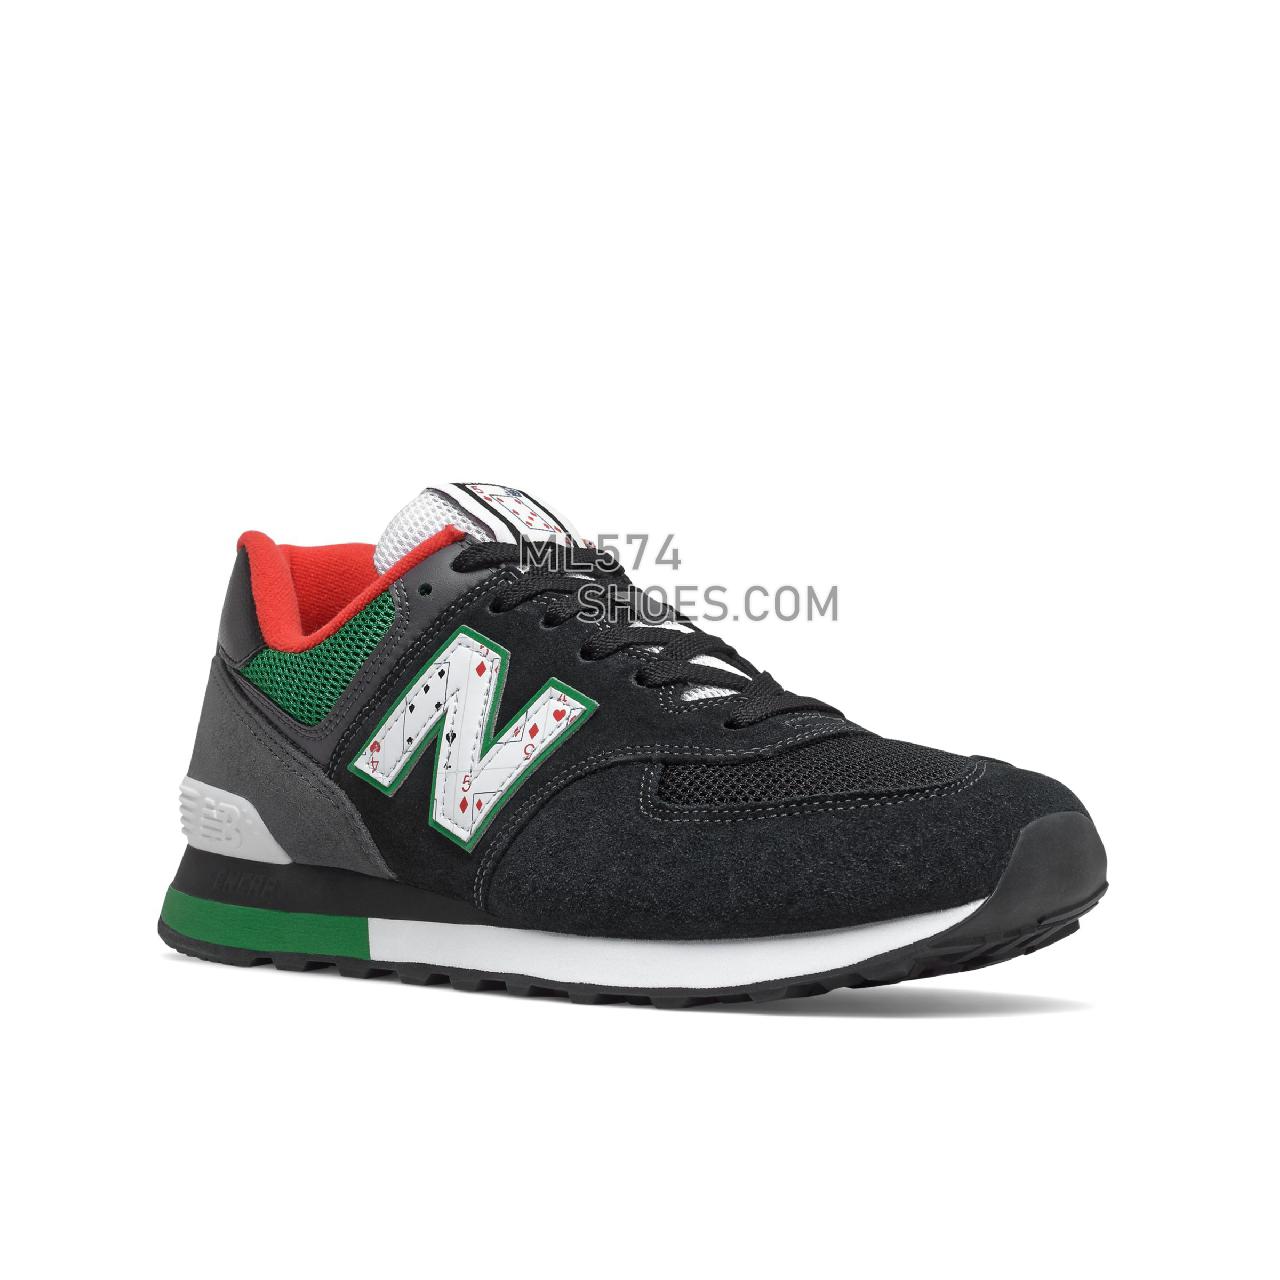 New Balance 574v2 - Men's Classic Sneakers - Black with Varsity Green - ML574WH2